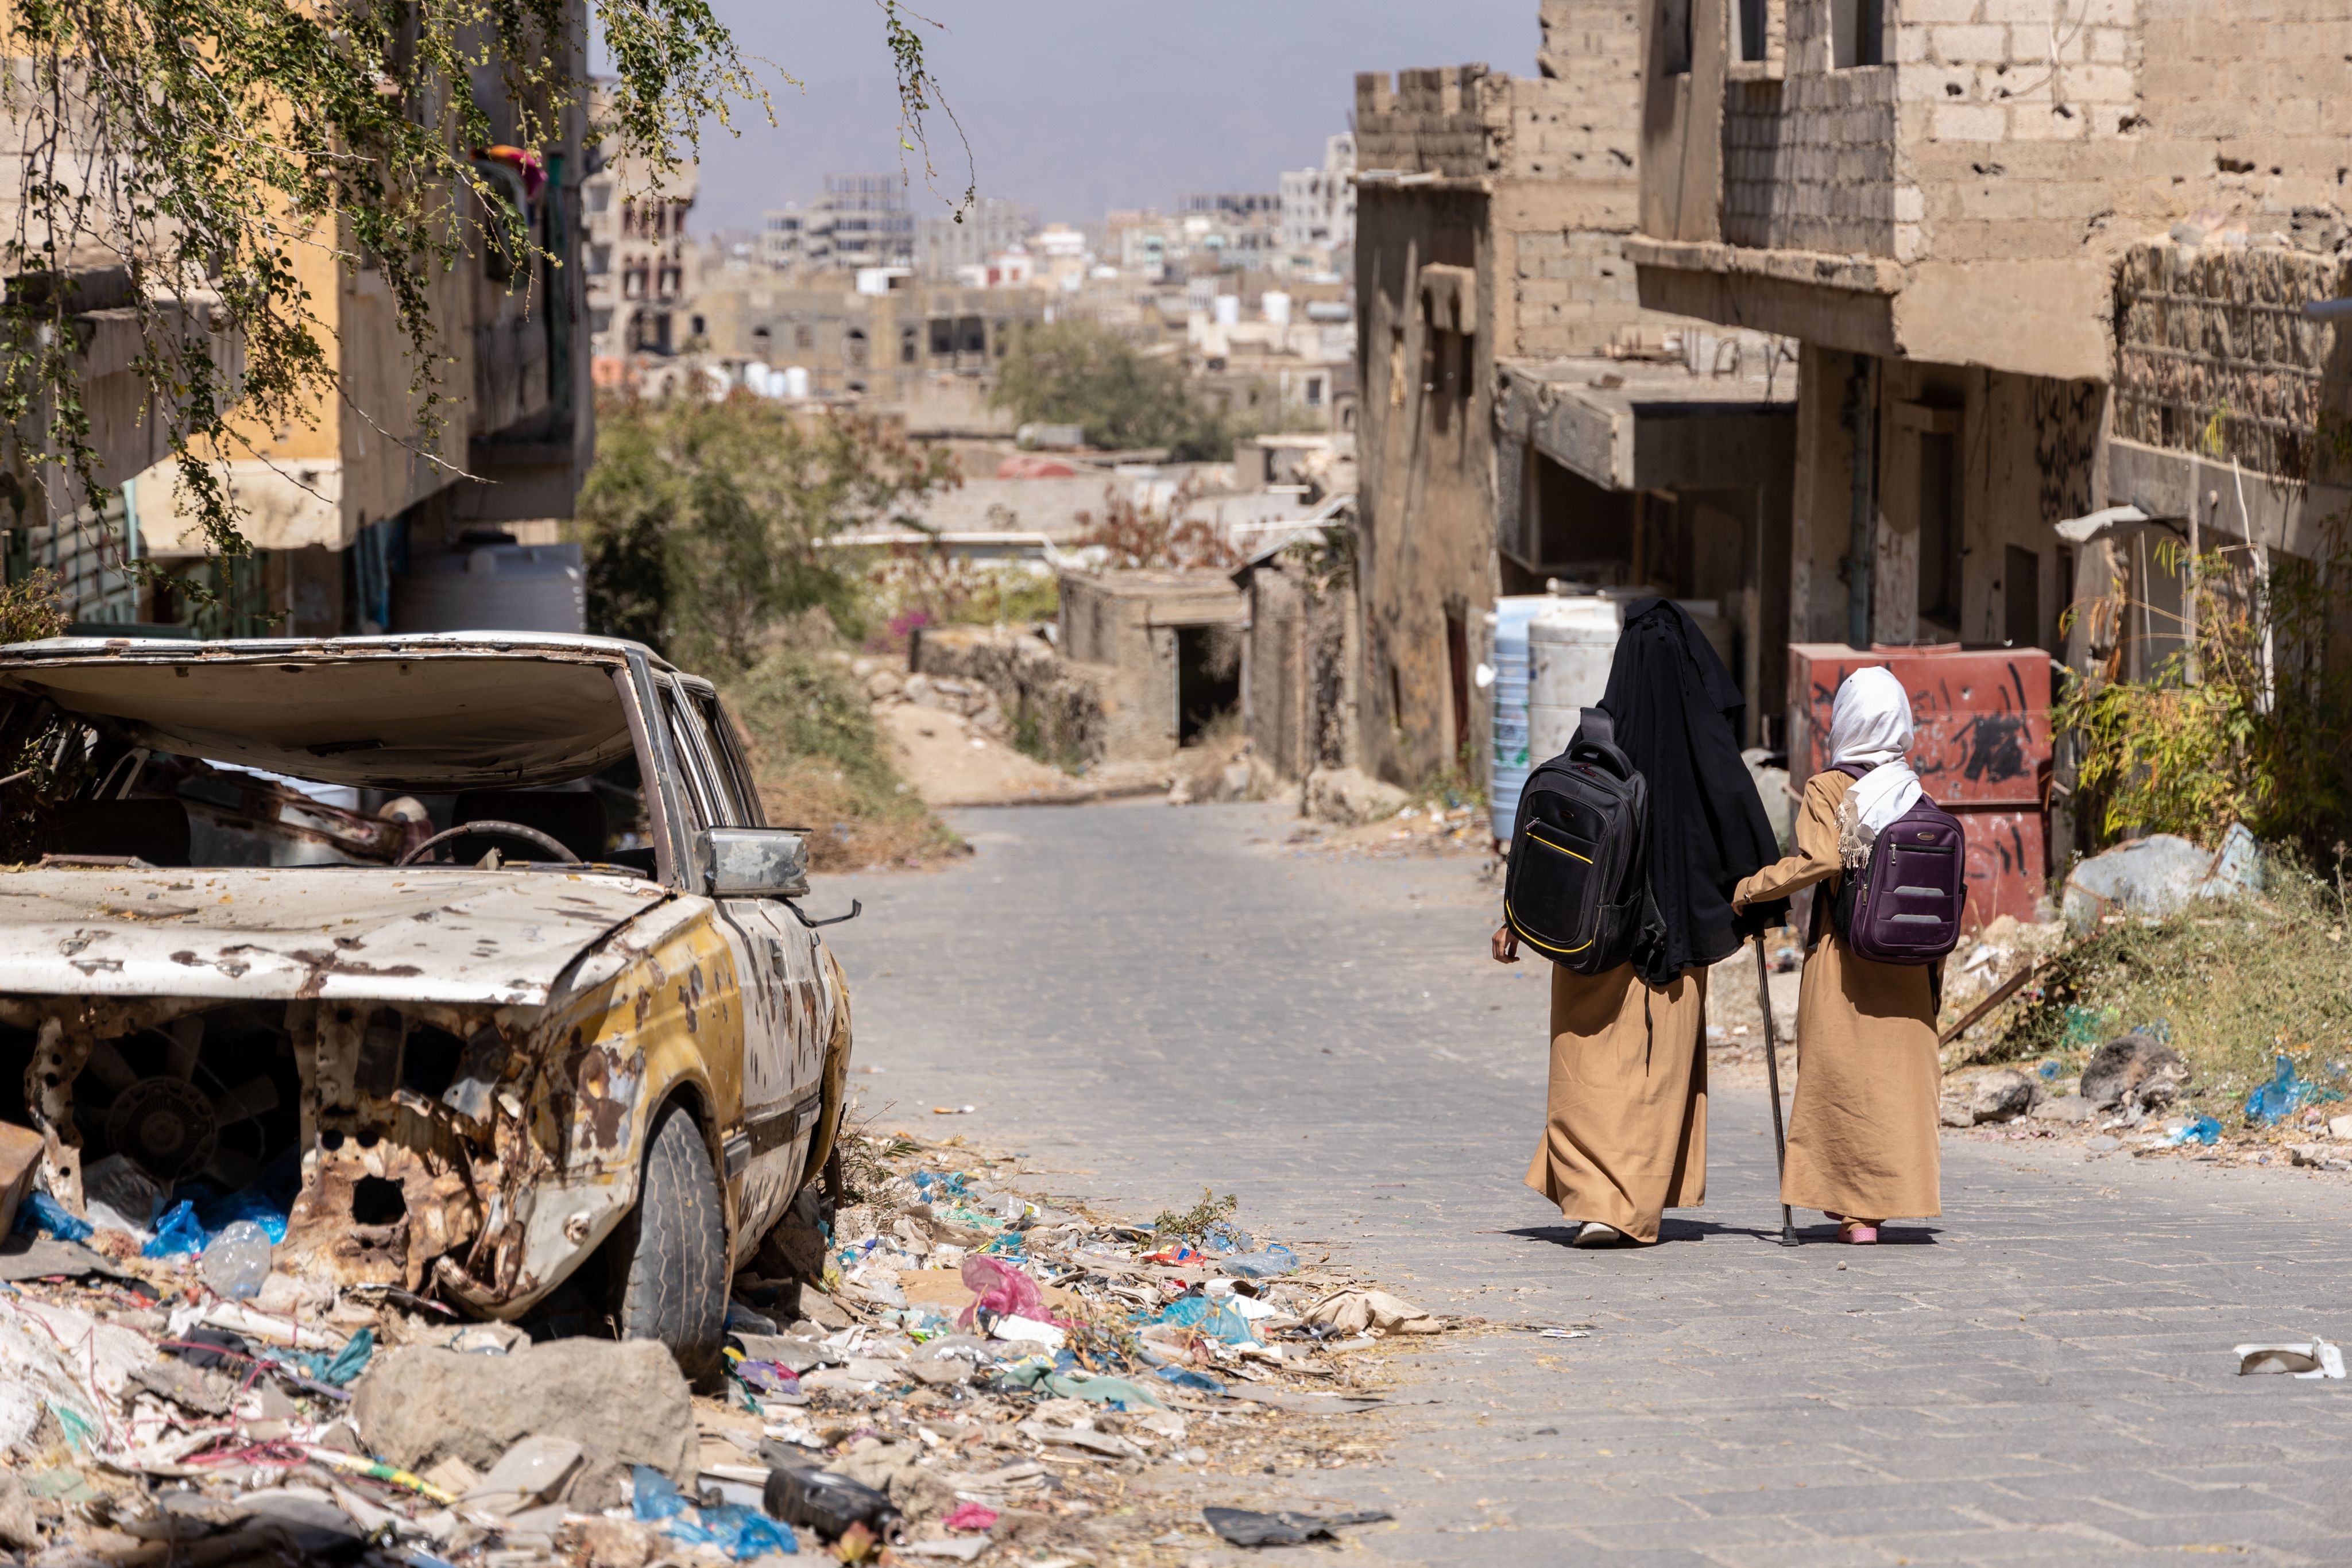 Maha, 10, & Maya, 16, walk home from school, passing destroyed vehicles and buildings in Yemen